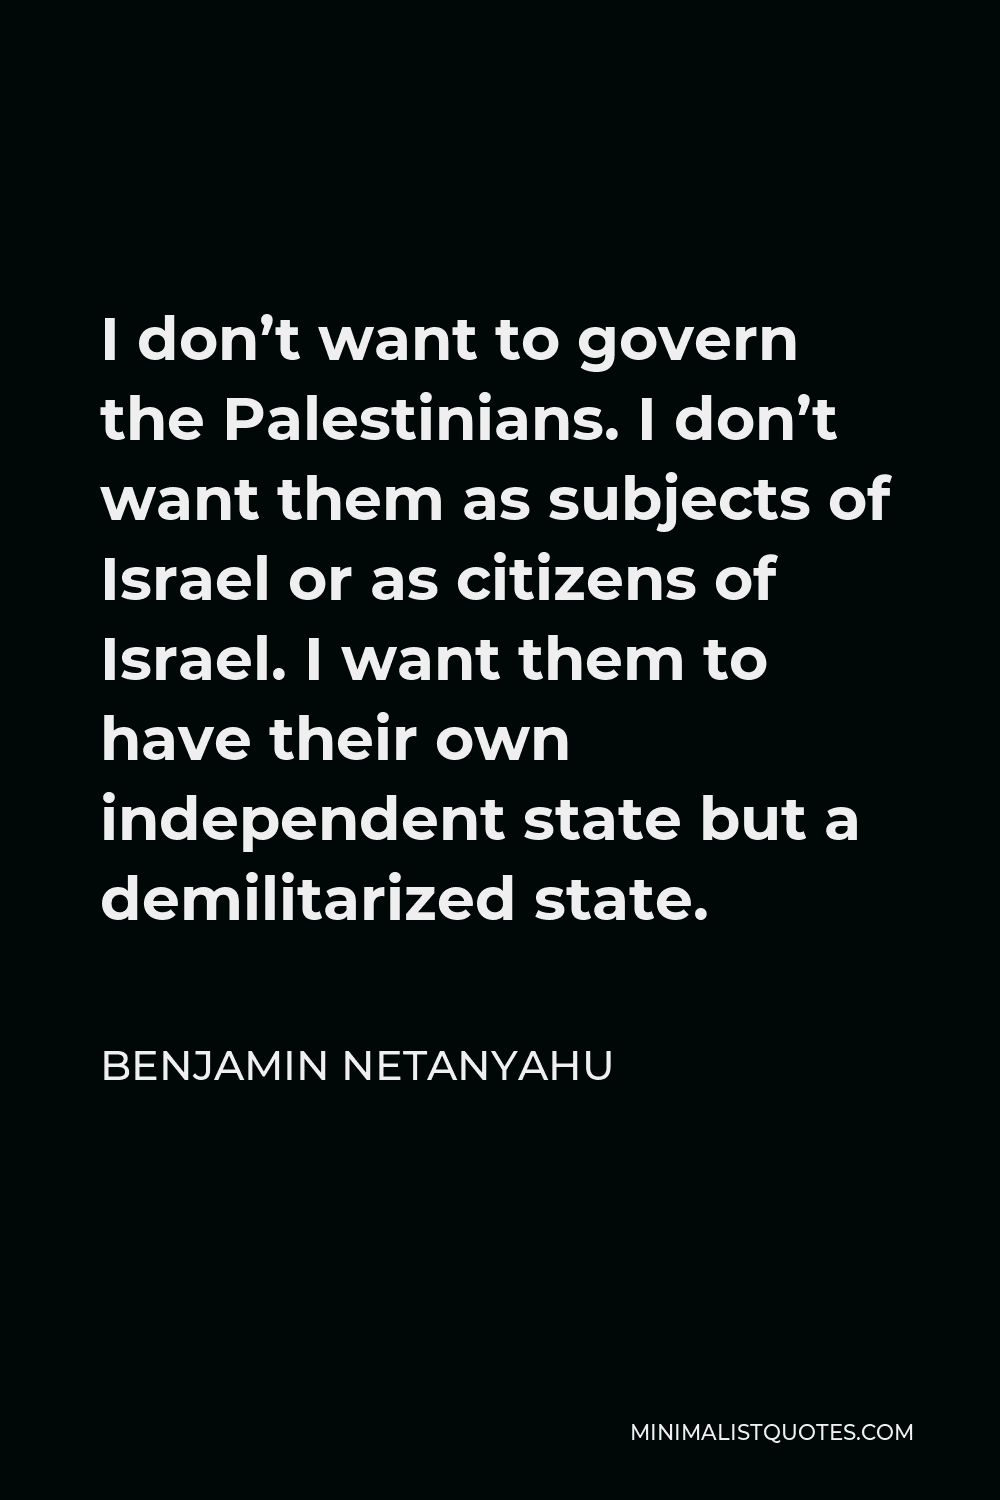 Benjamin Netanyahu Quote - I don’t want to govern the Palestinians. I don’t want them as subjects of Israel or as citizens of Israel. I want them to have their own independent state but a demilitarized state.